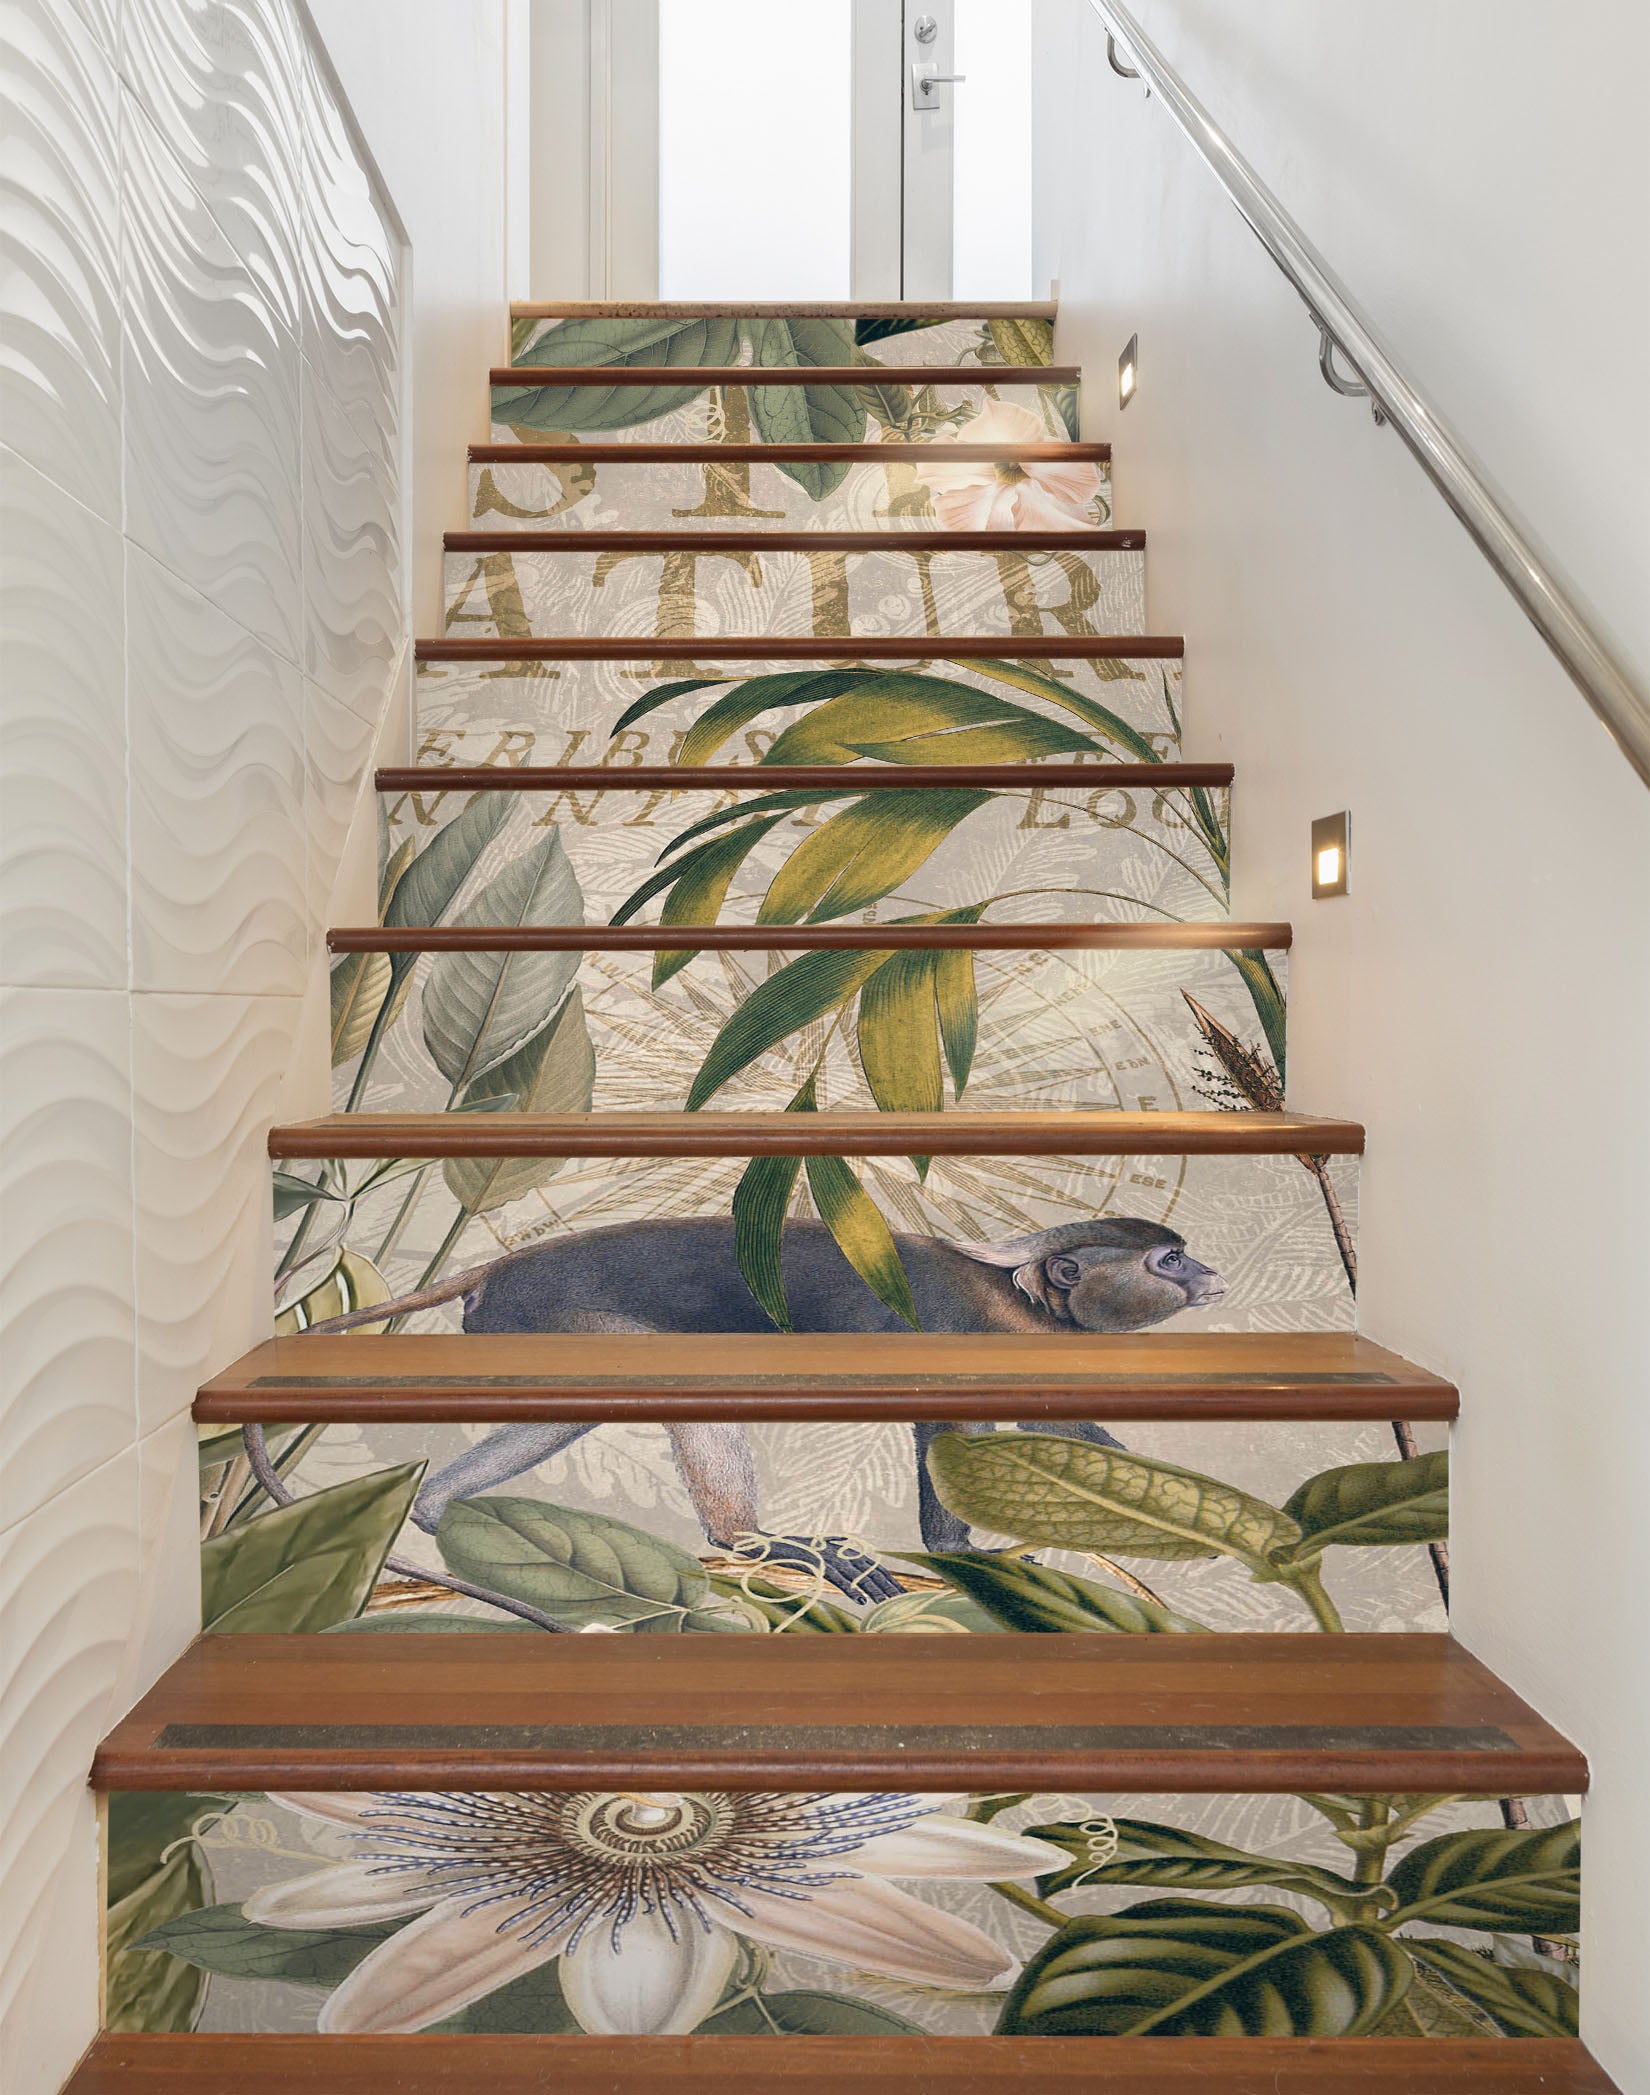 3D Leaves Monkey 11034 Andrea Haase Stair Risers